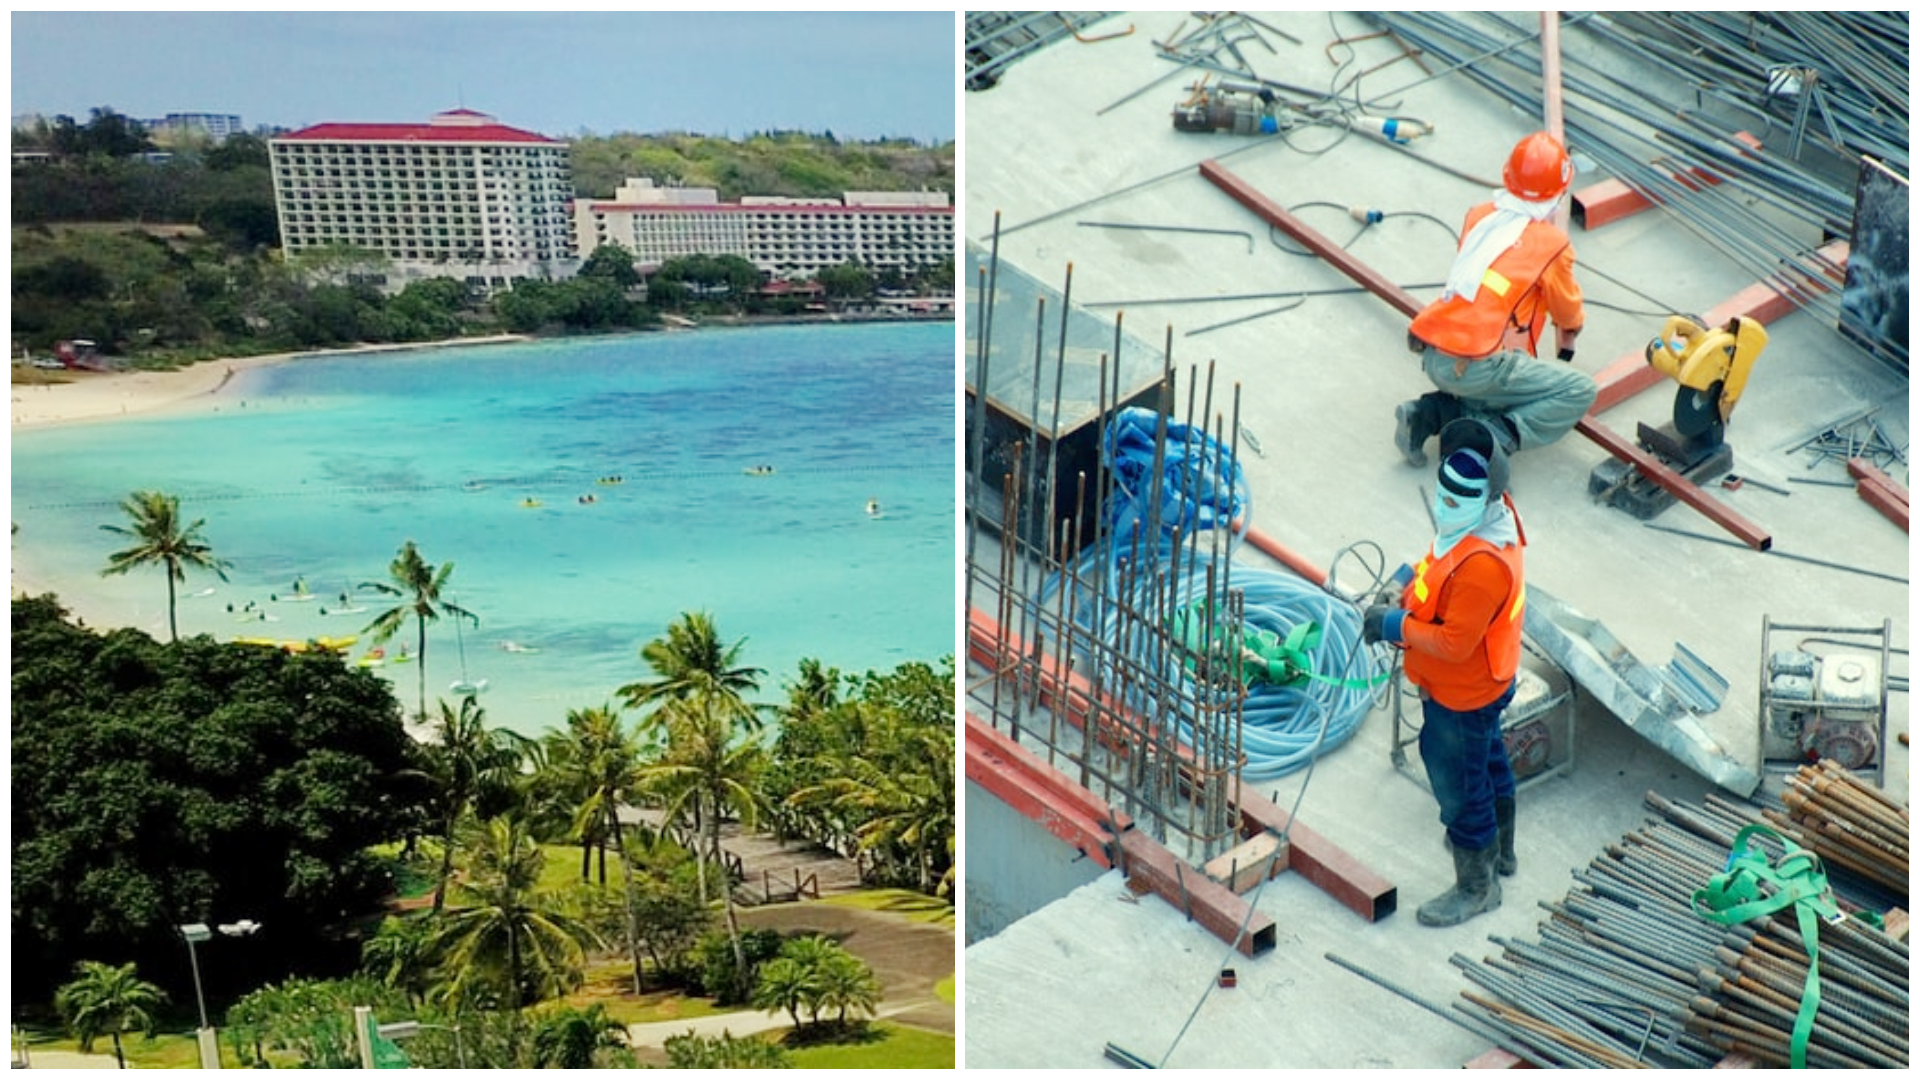 Guam offers 11,500 jobs specifically for Filipinos